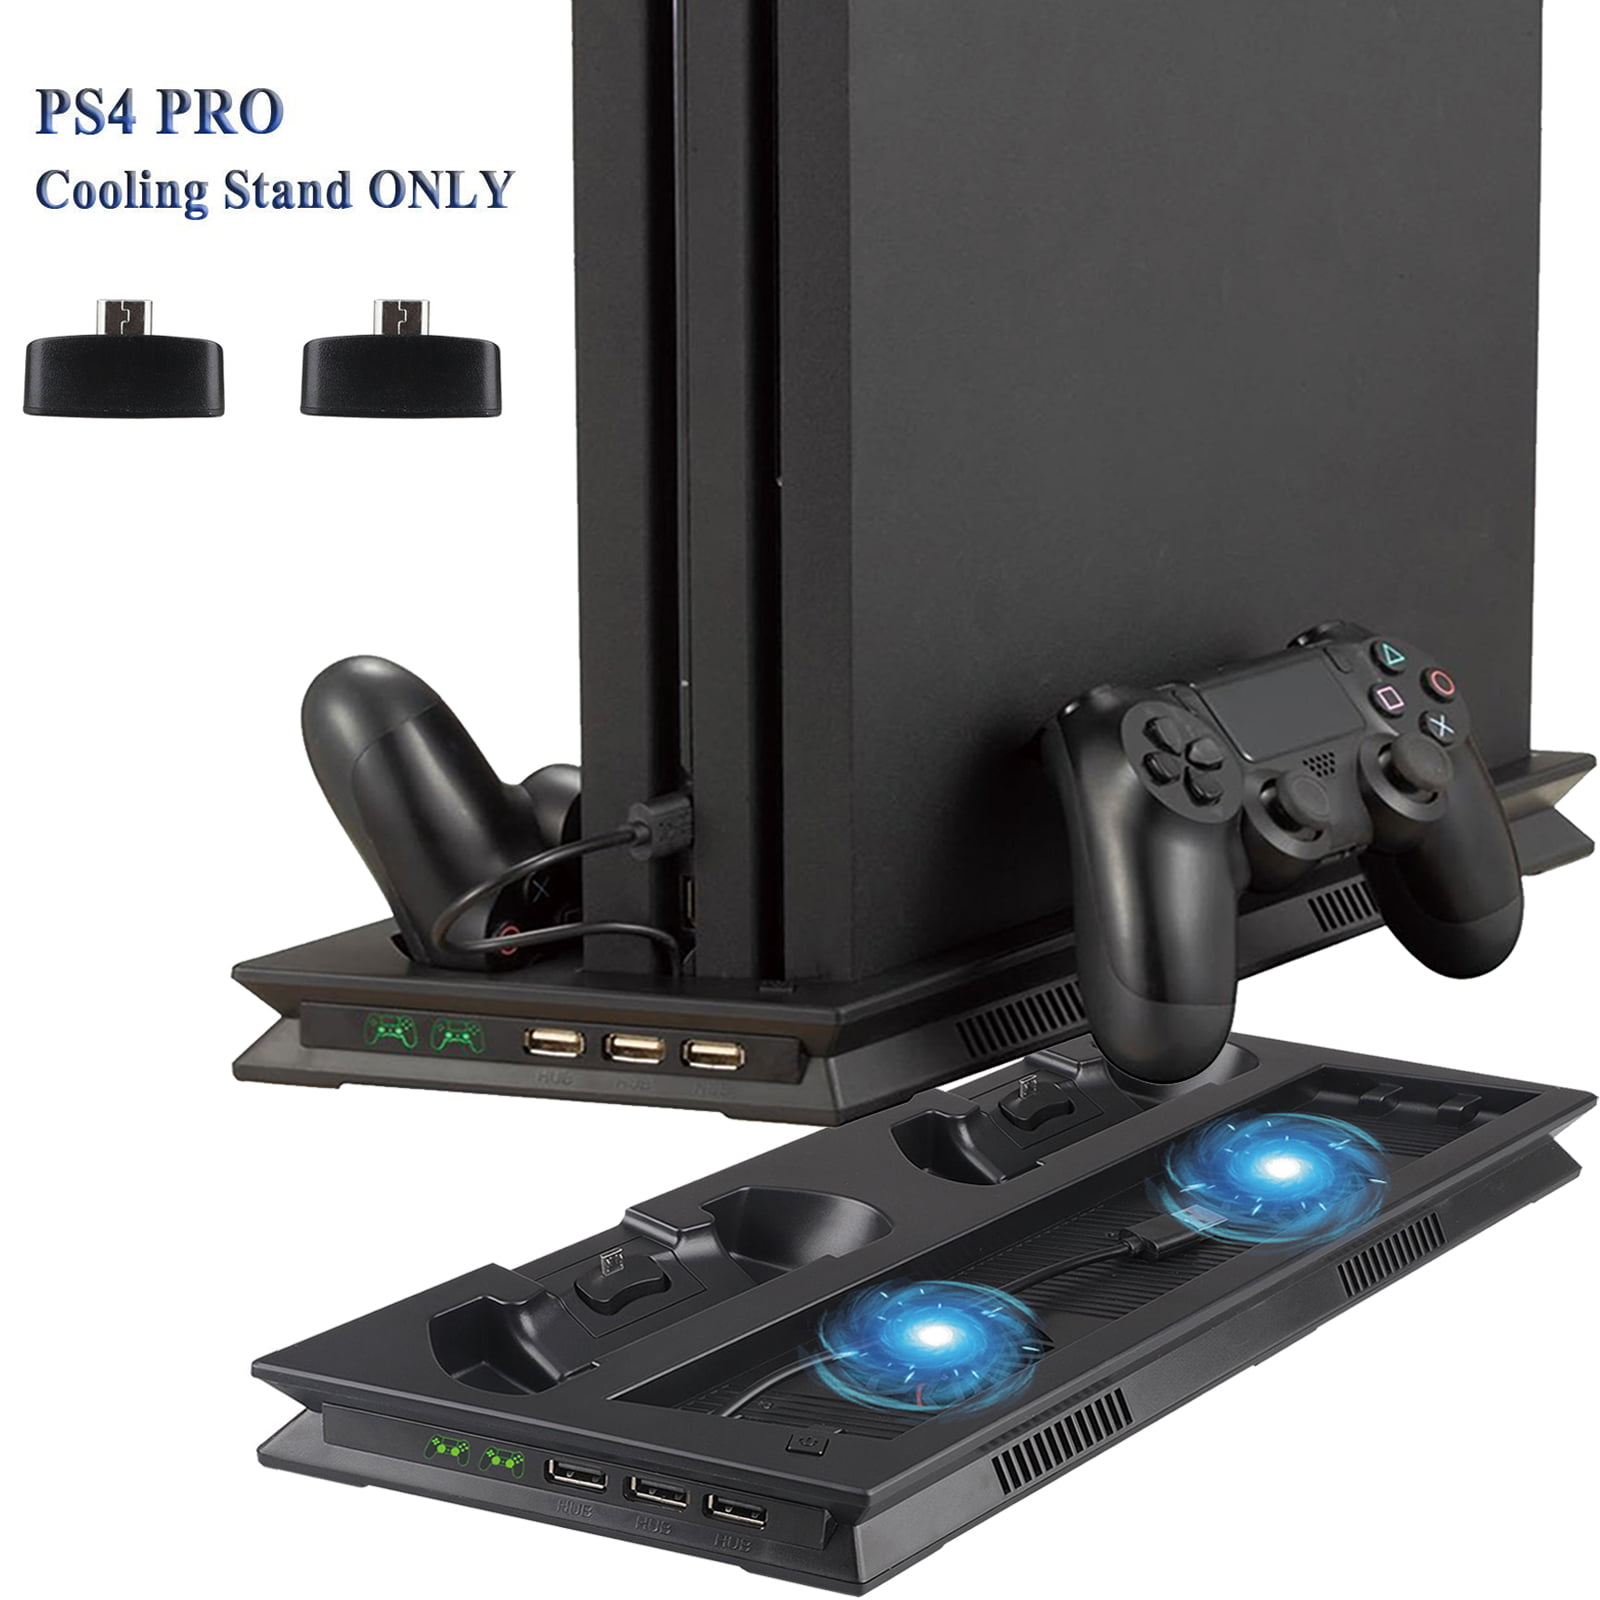 ps4 cooling stand walmart